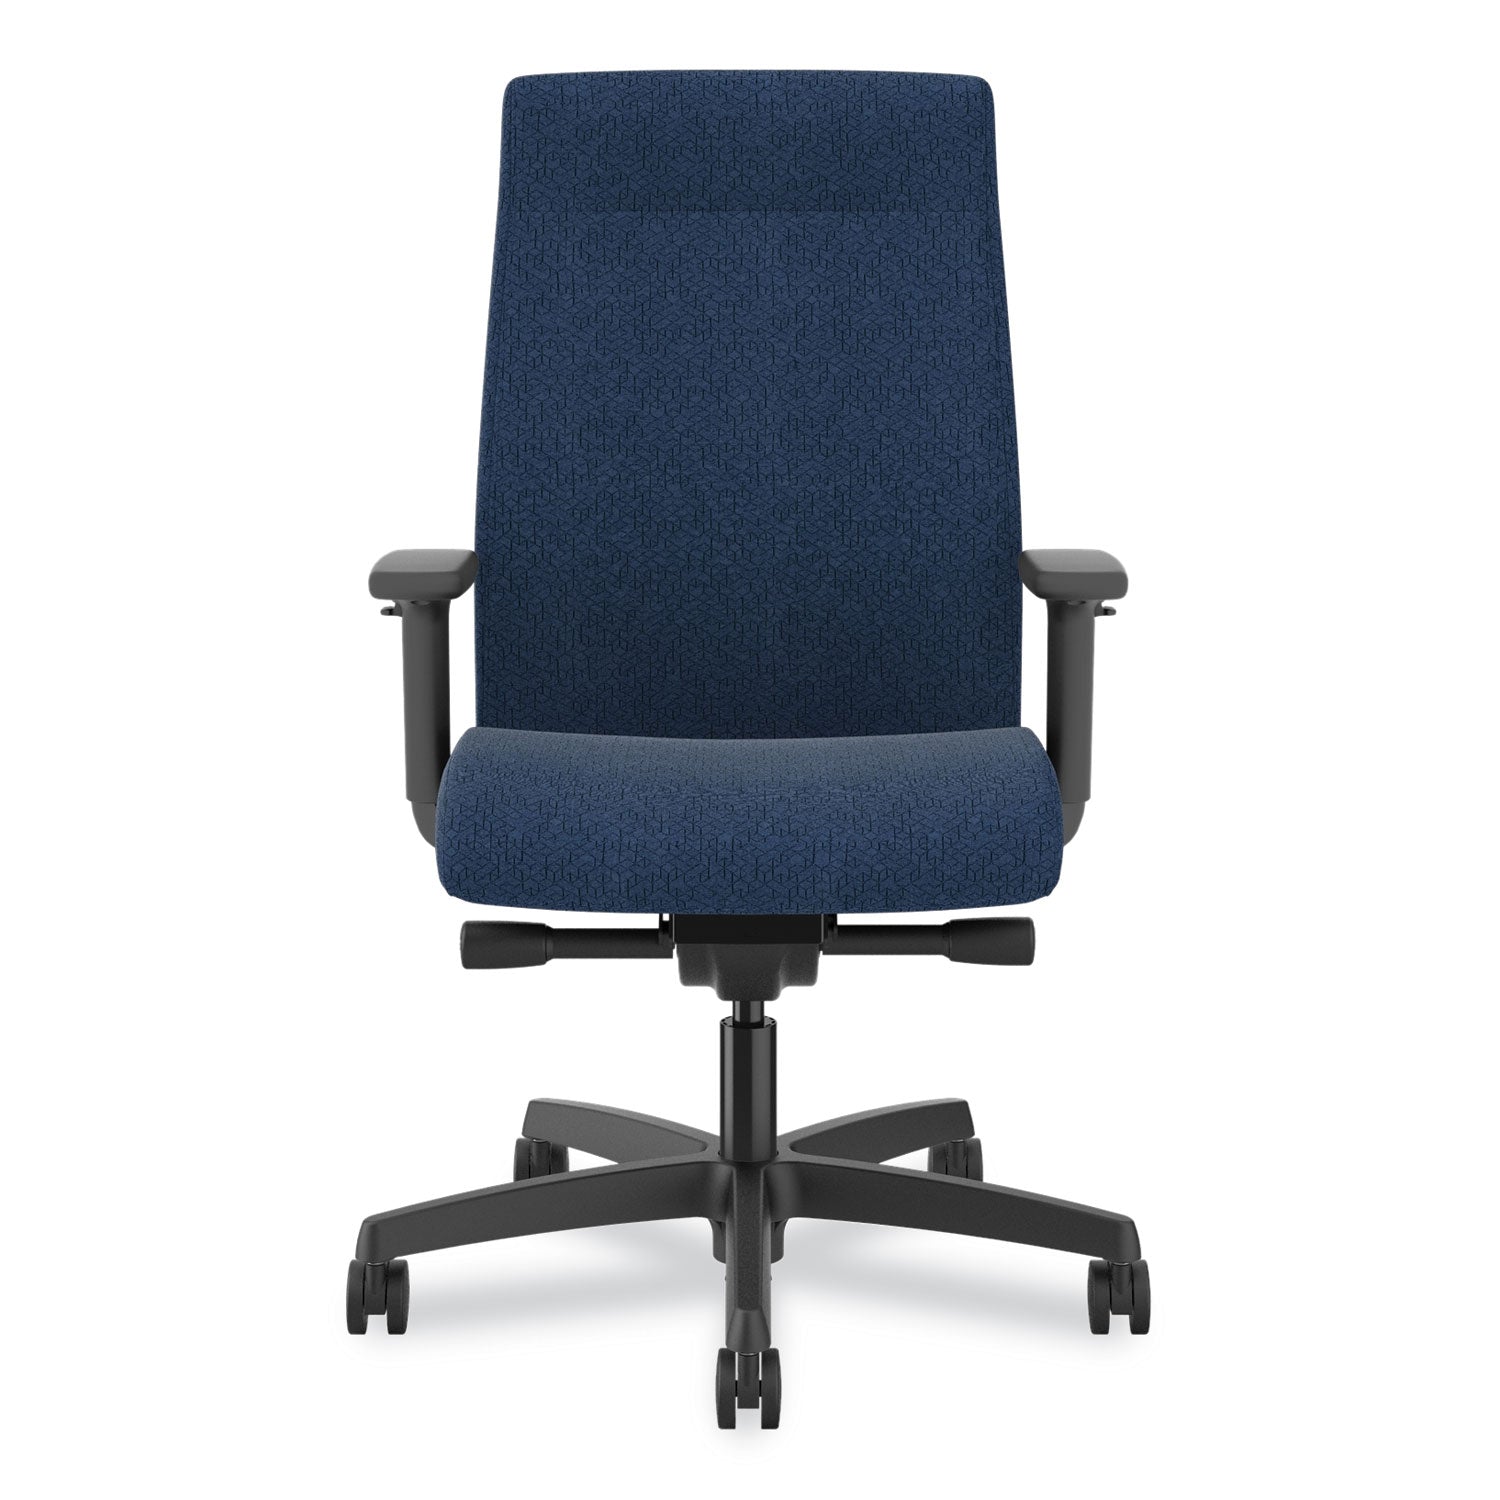 ignition-20-upholstered-mid-back-task-chair-17-to-215-seat-height-navy-fabric-seat-back-ships-in-7-10-business-days_honi2u2ahax13tk - 4